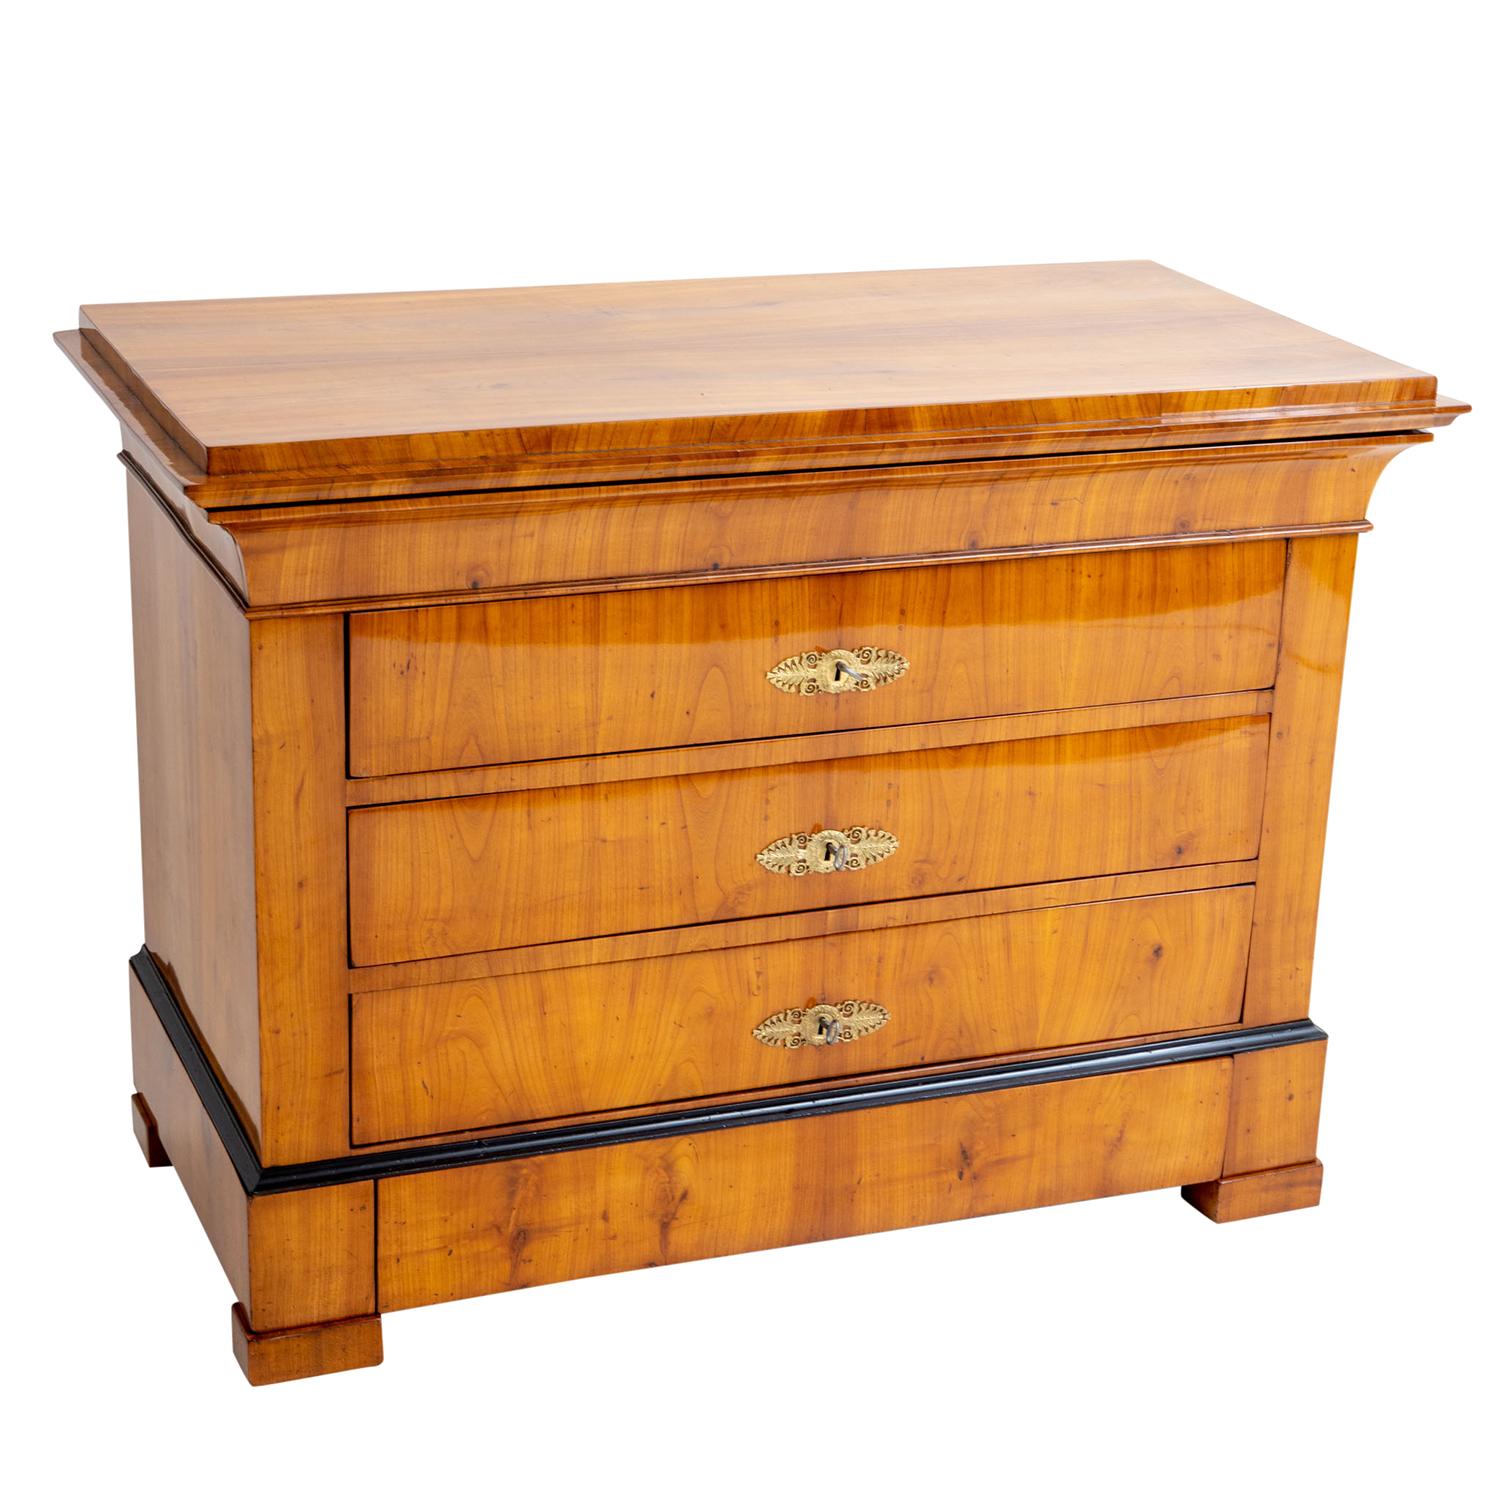 An antique German Biedermeier single chest made of hand crafted shellac polished, partly veneered Cherrywood, in good condition. The detailed cabinet is composed with five drawers, consisting its original hardware and keys, enhanced by polished